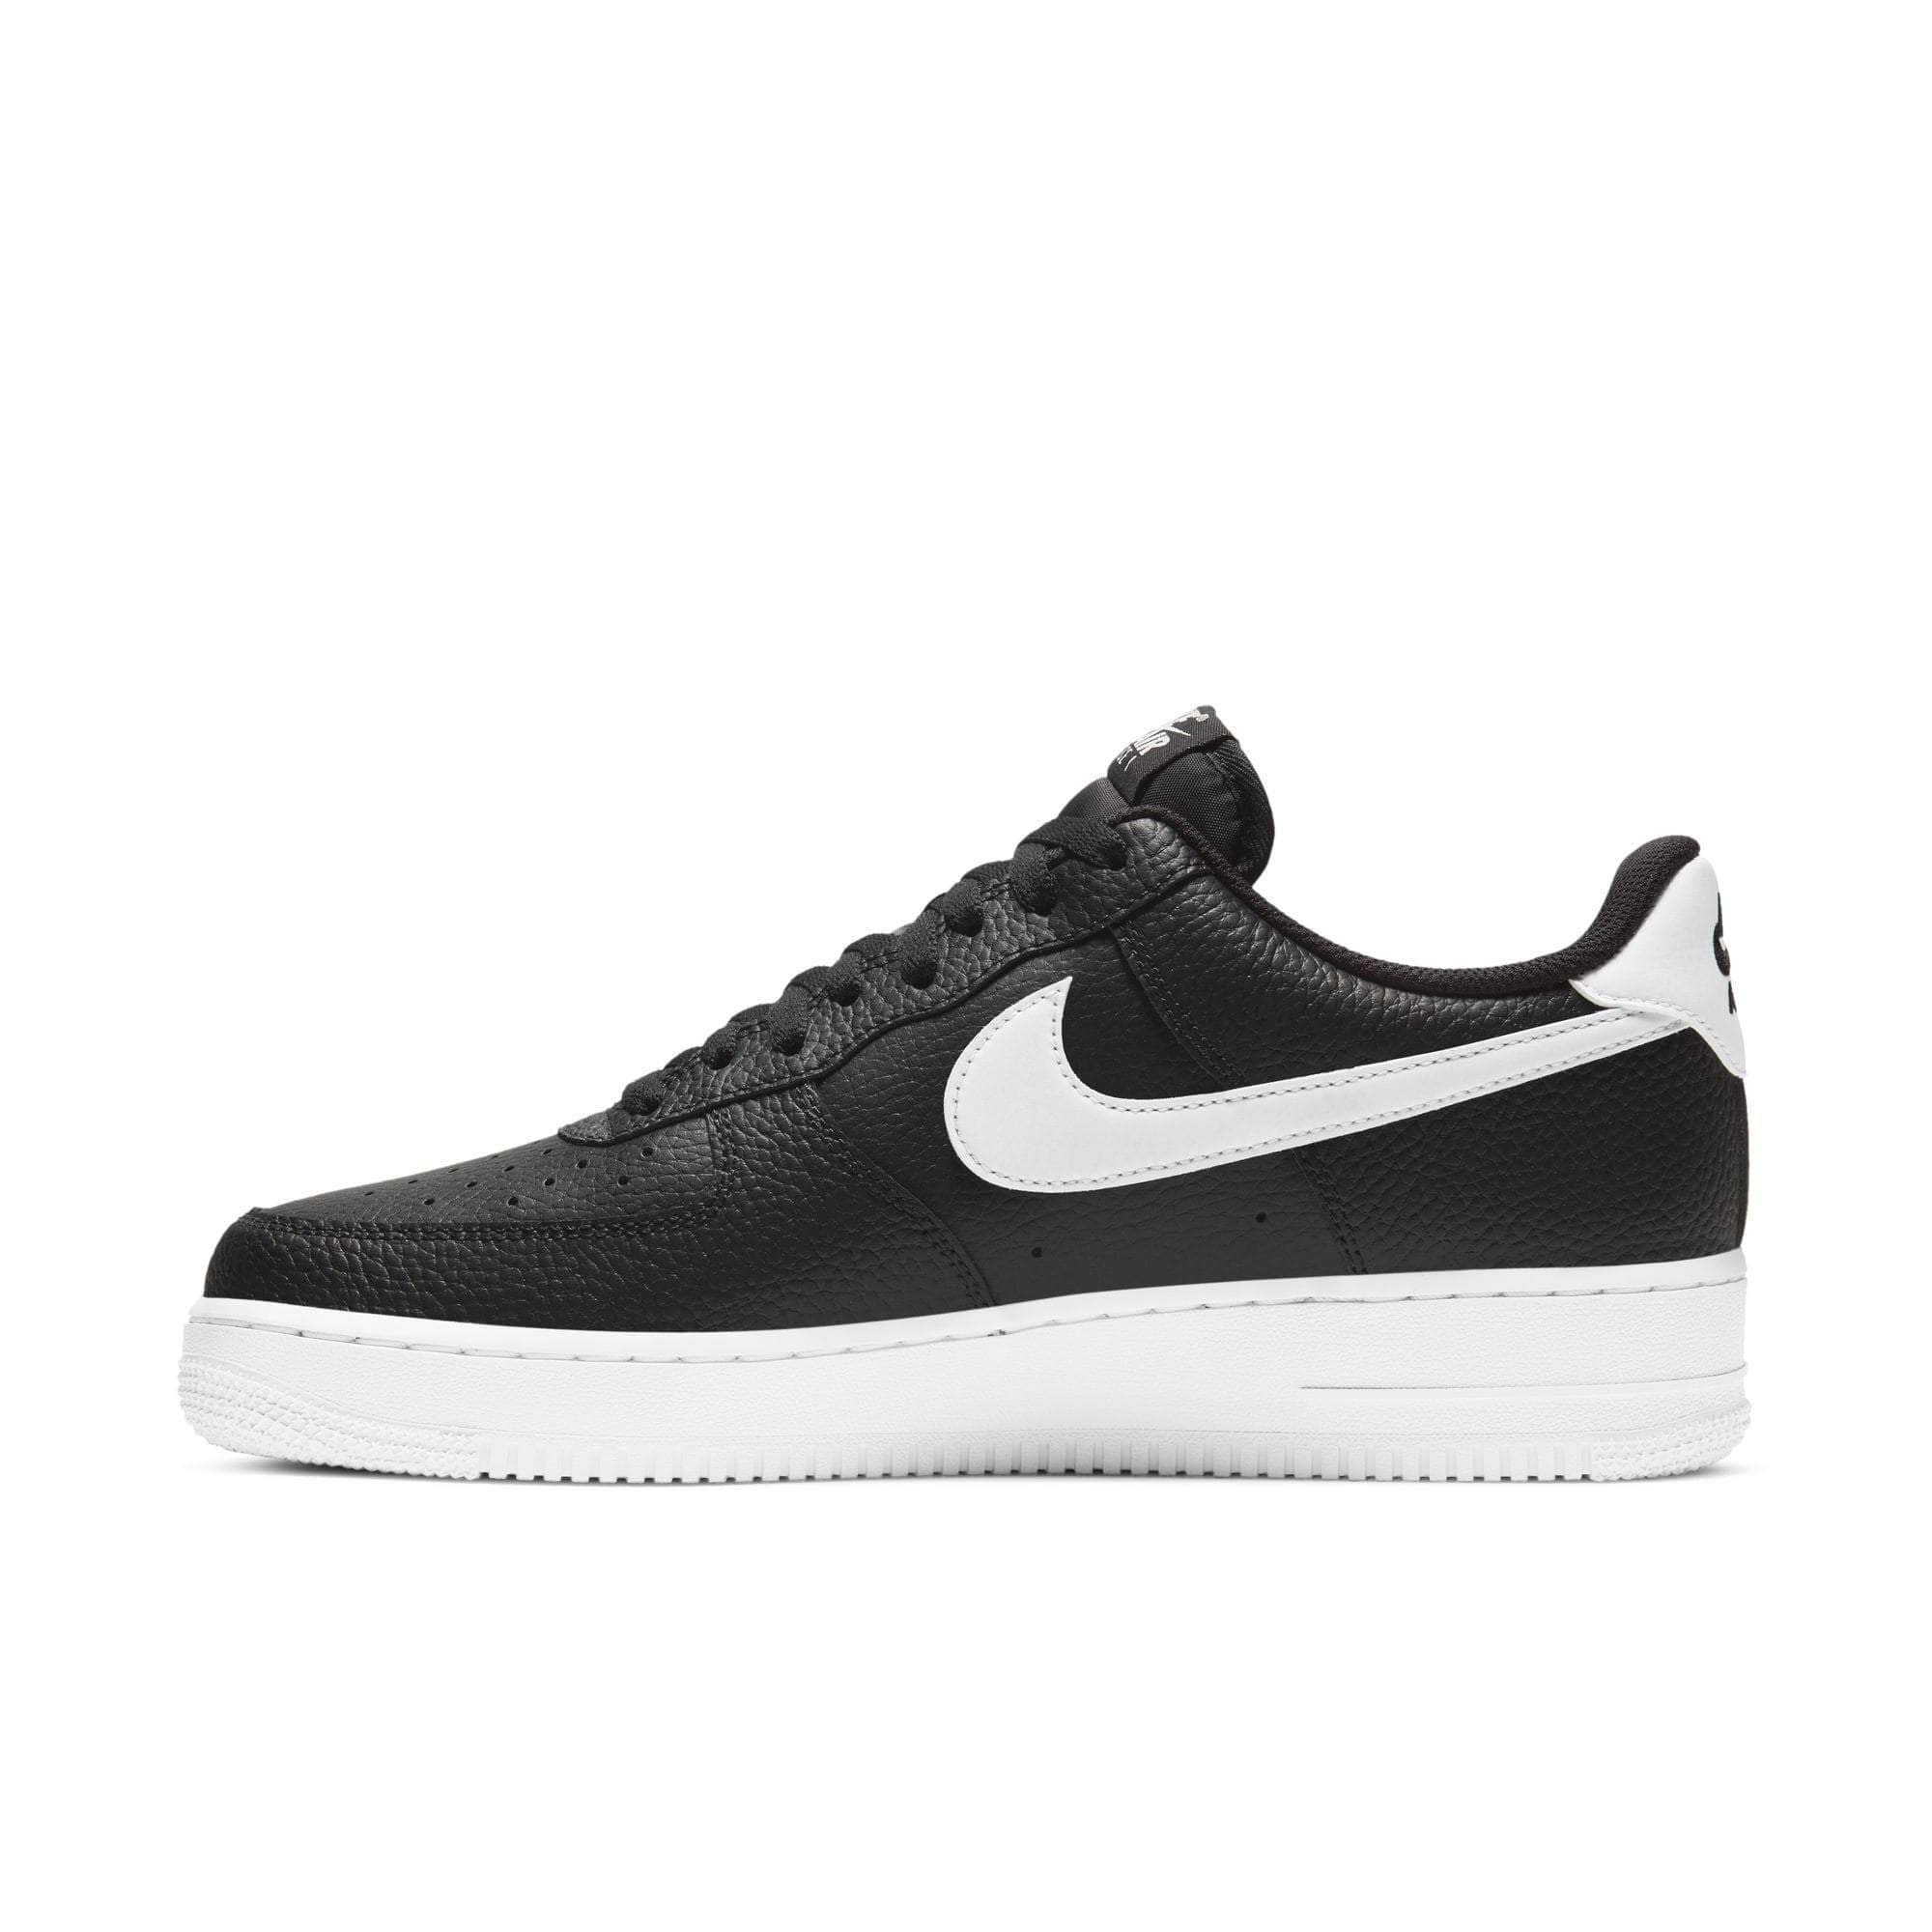 Nike Air Force 1 Low '07 Black White Pebbled Leather - Men's